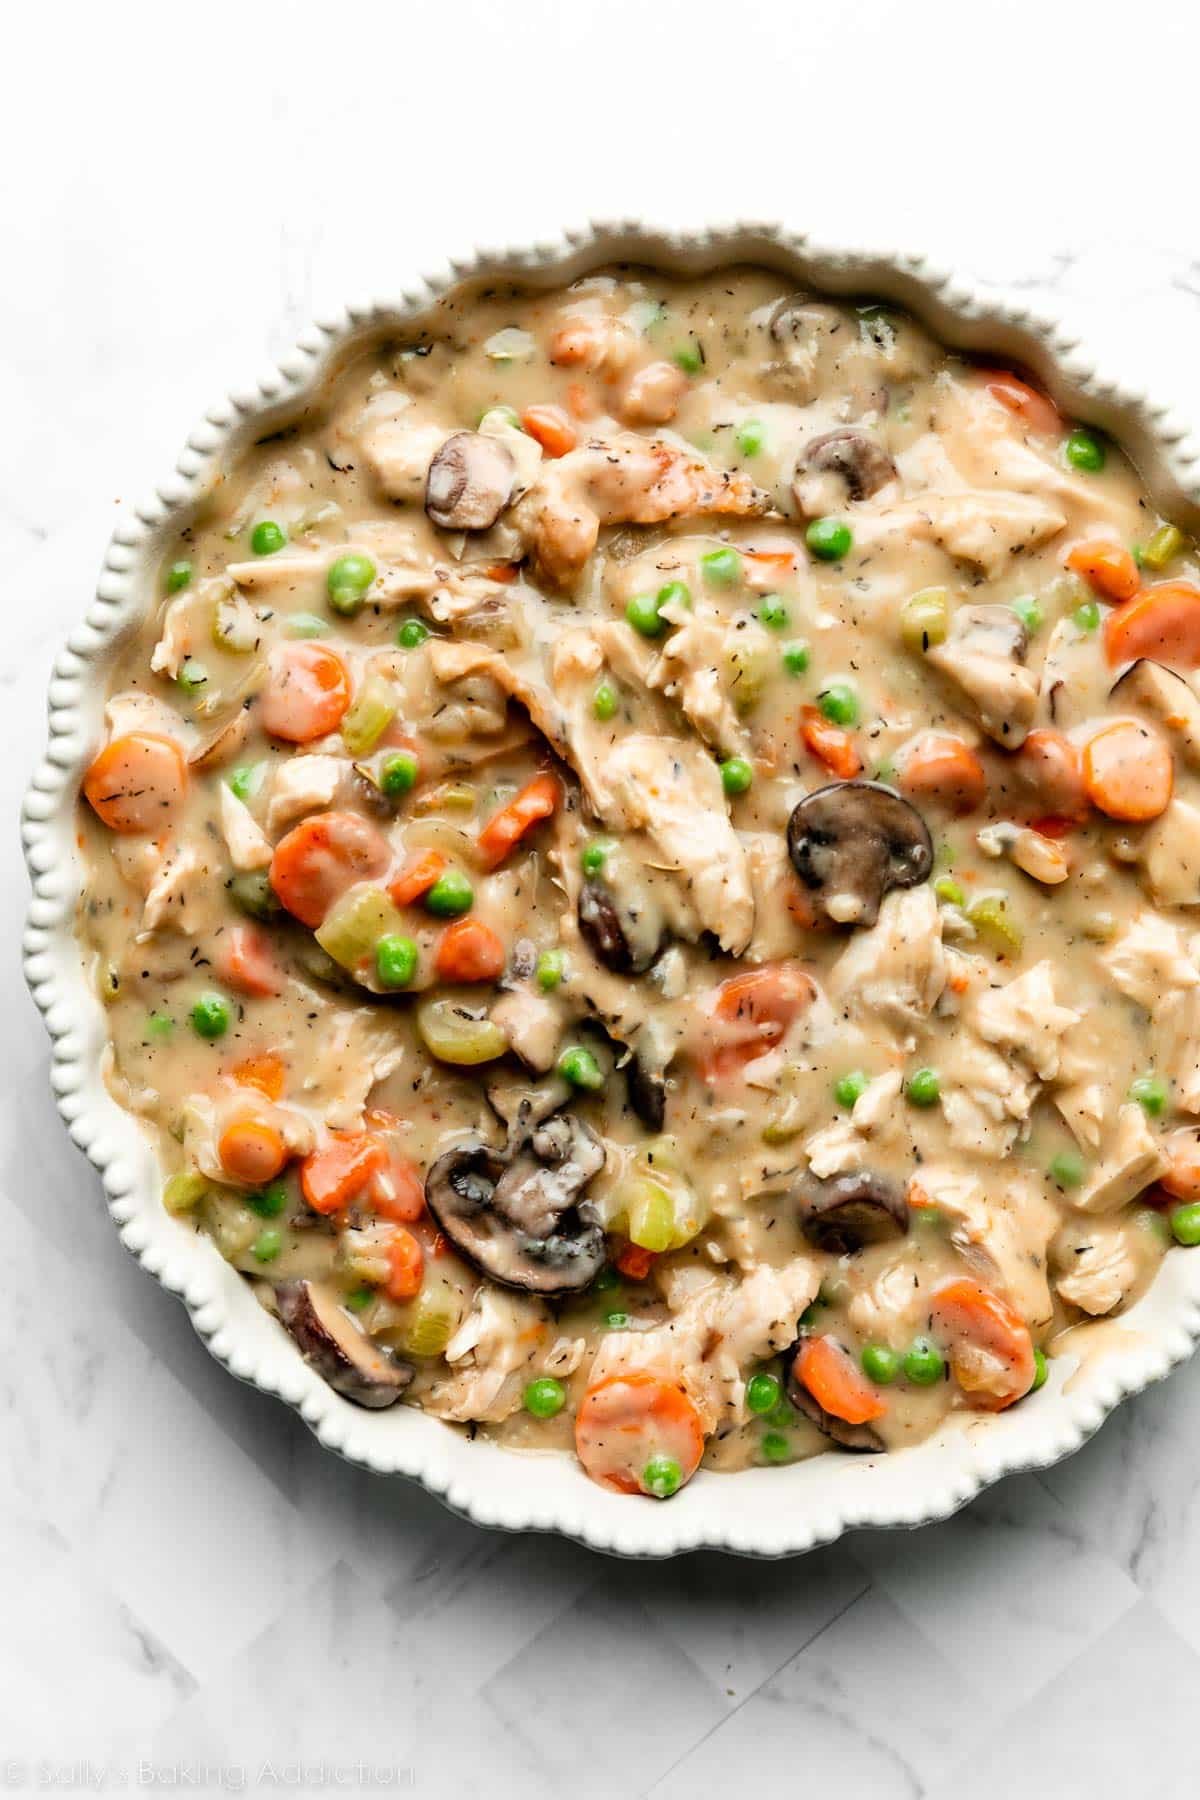 turkey pot pie filling with gravy, carrots, peas, and mushrooms in pie dish.